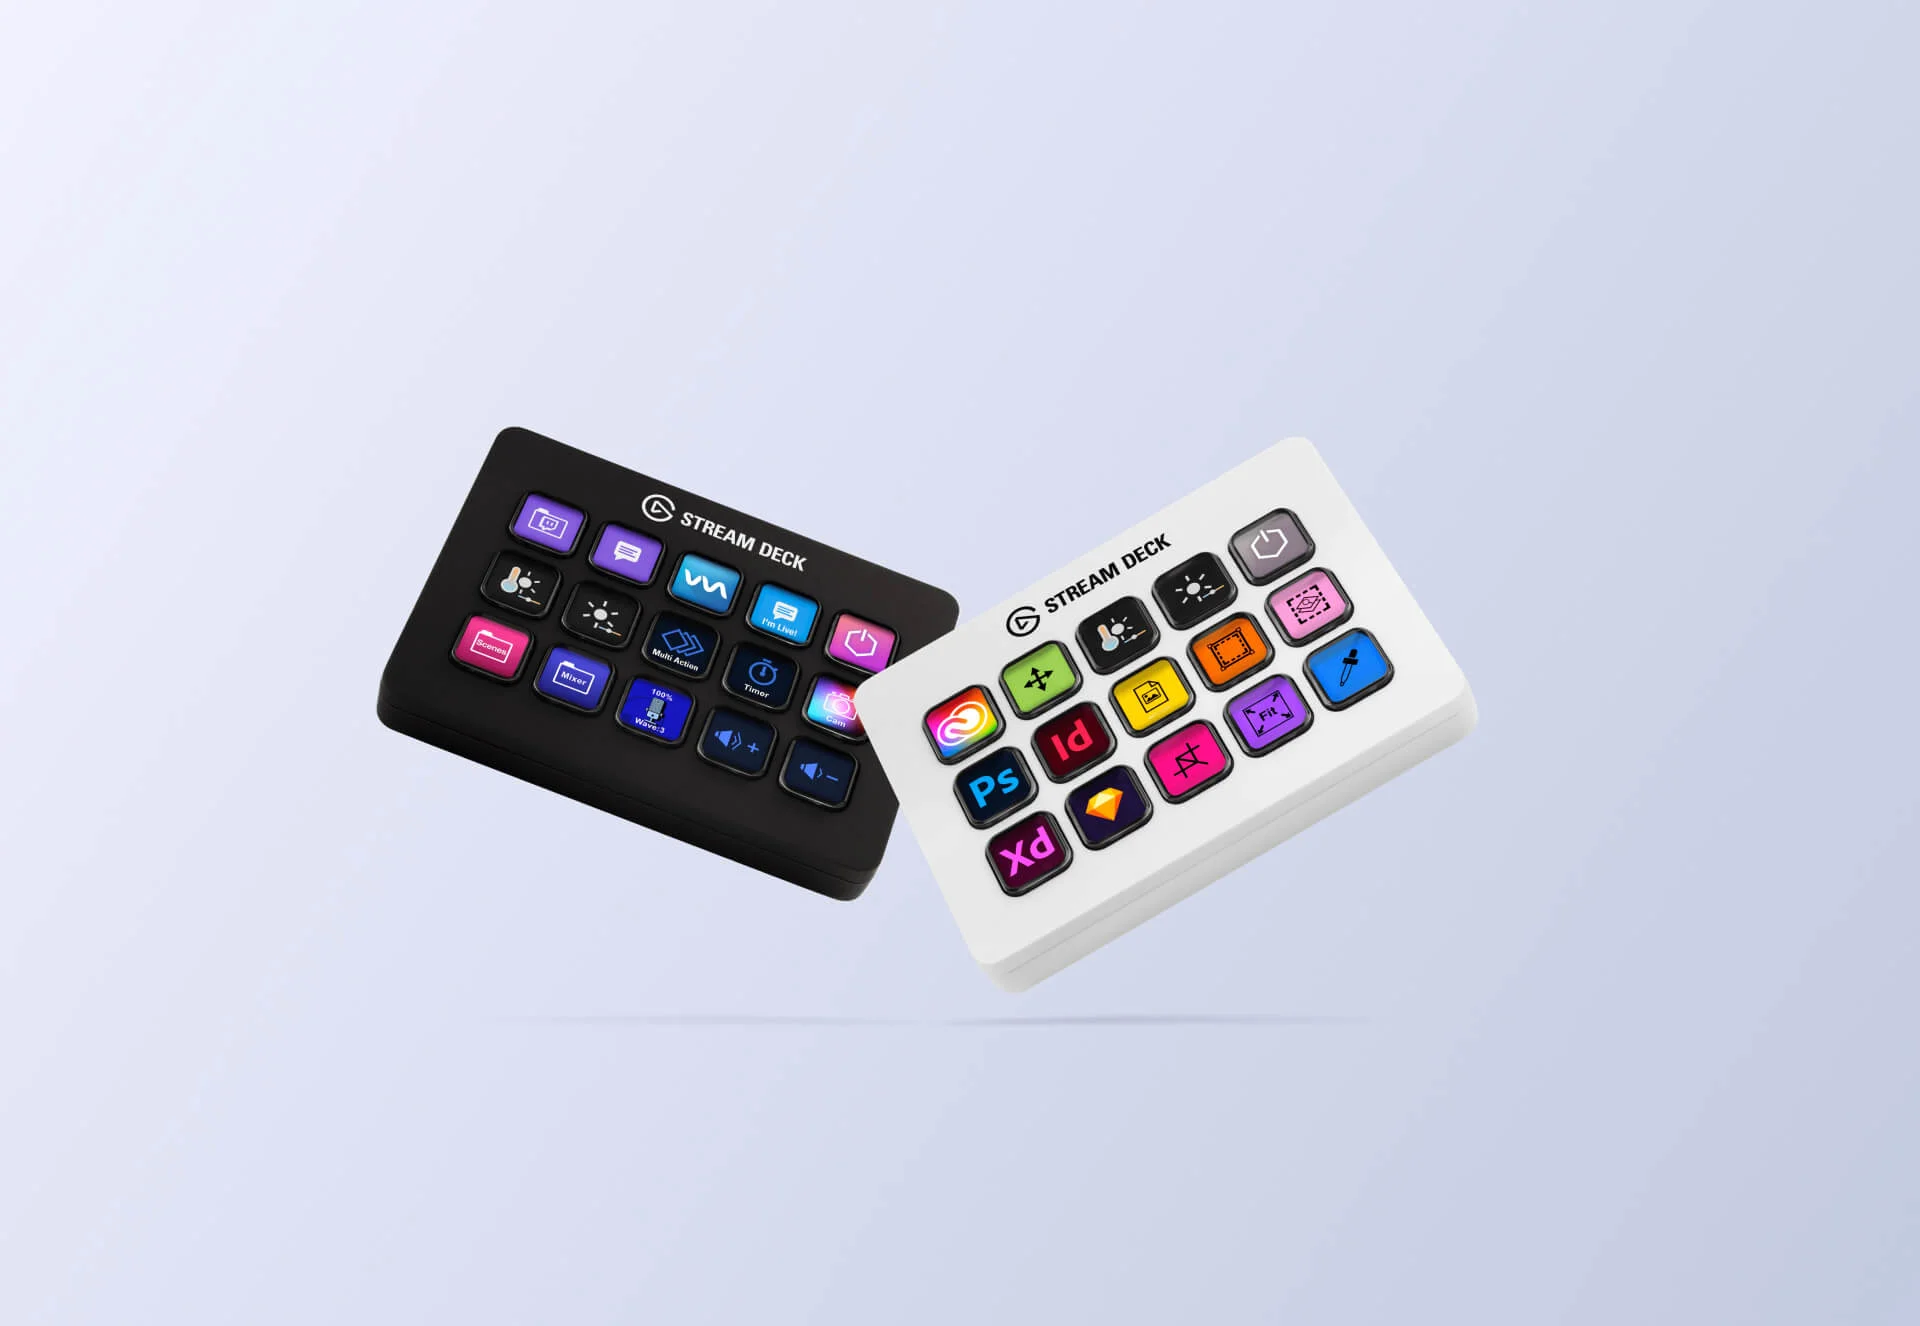 Stream Deck MK.2 Black and White versions side by side